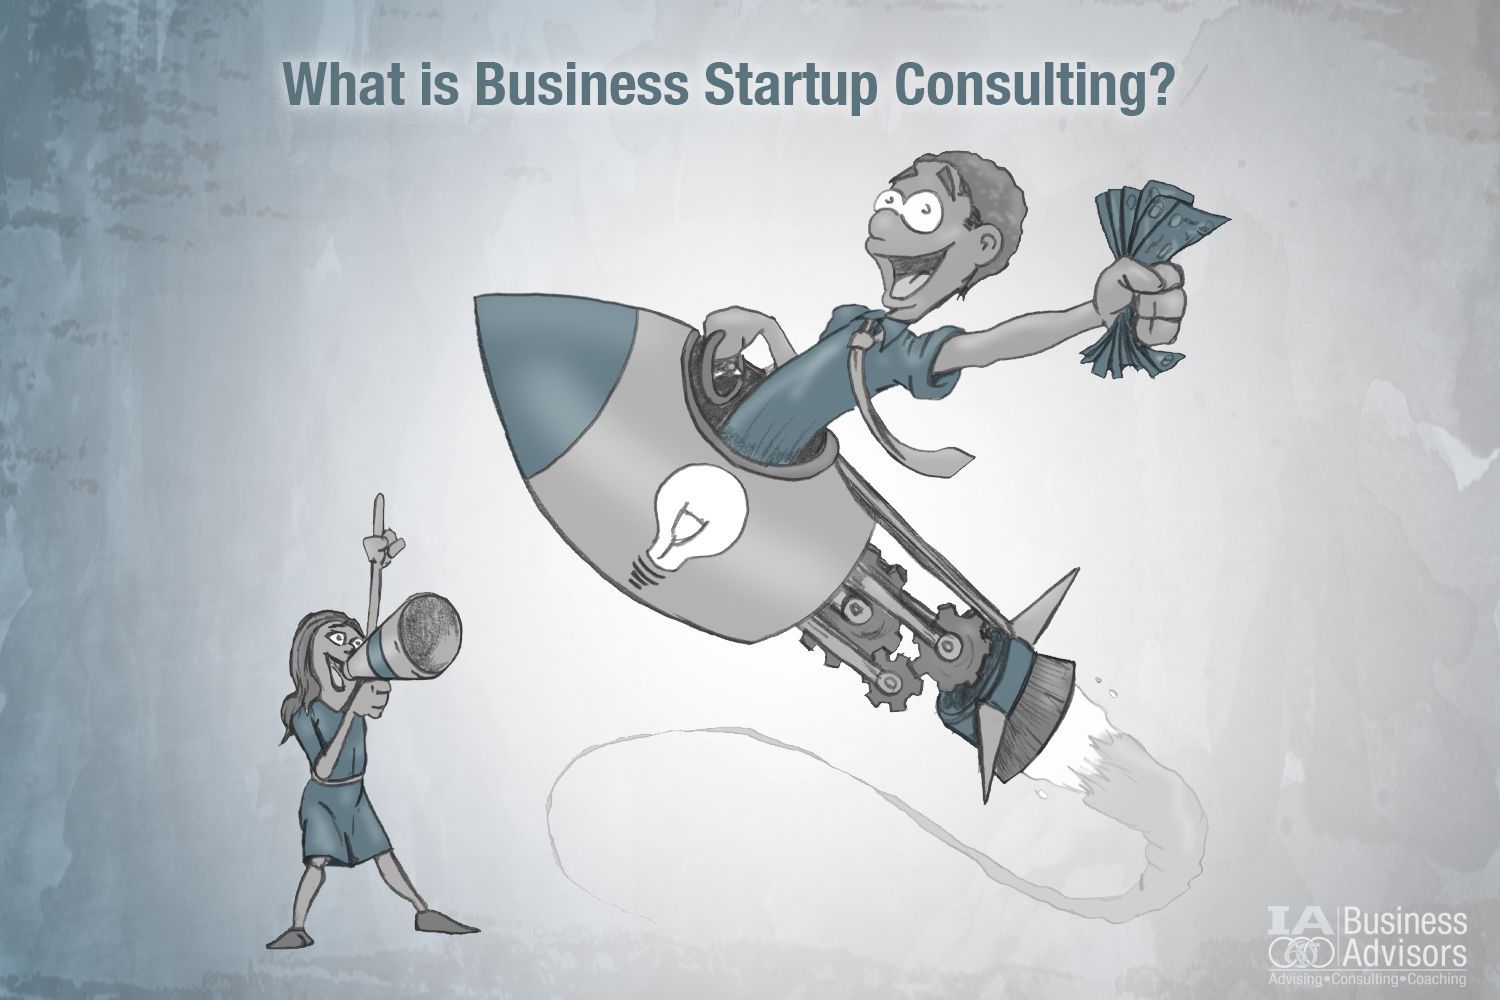 What is Business Startup Consulting?